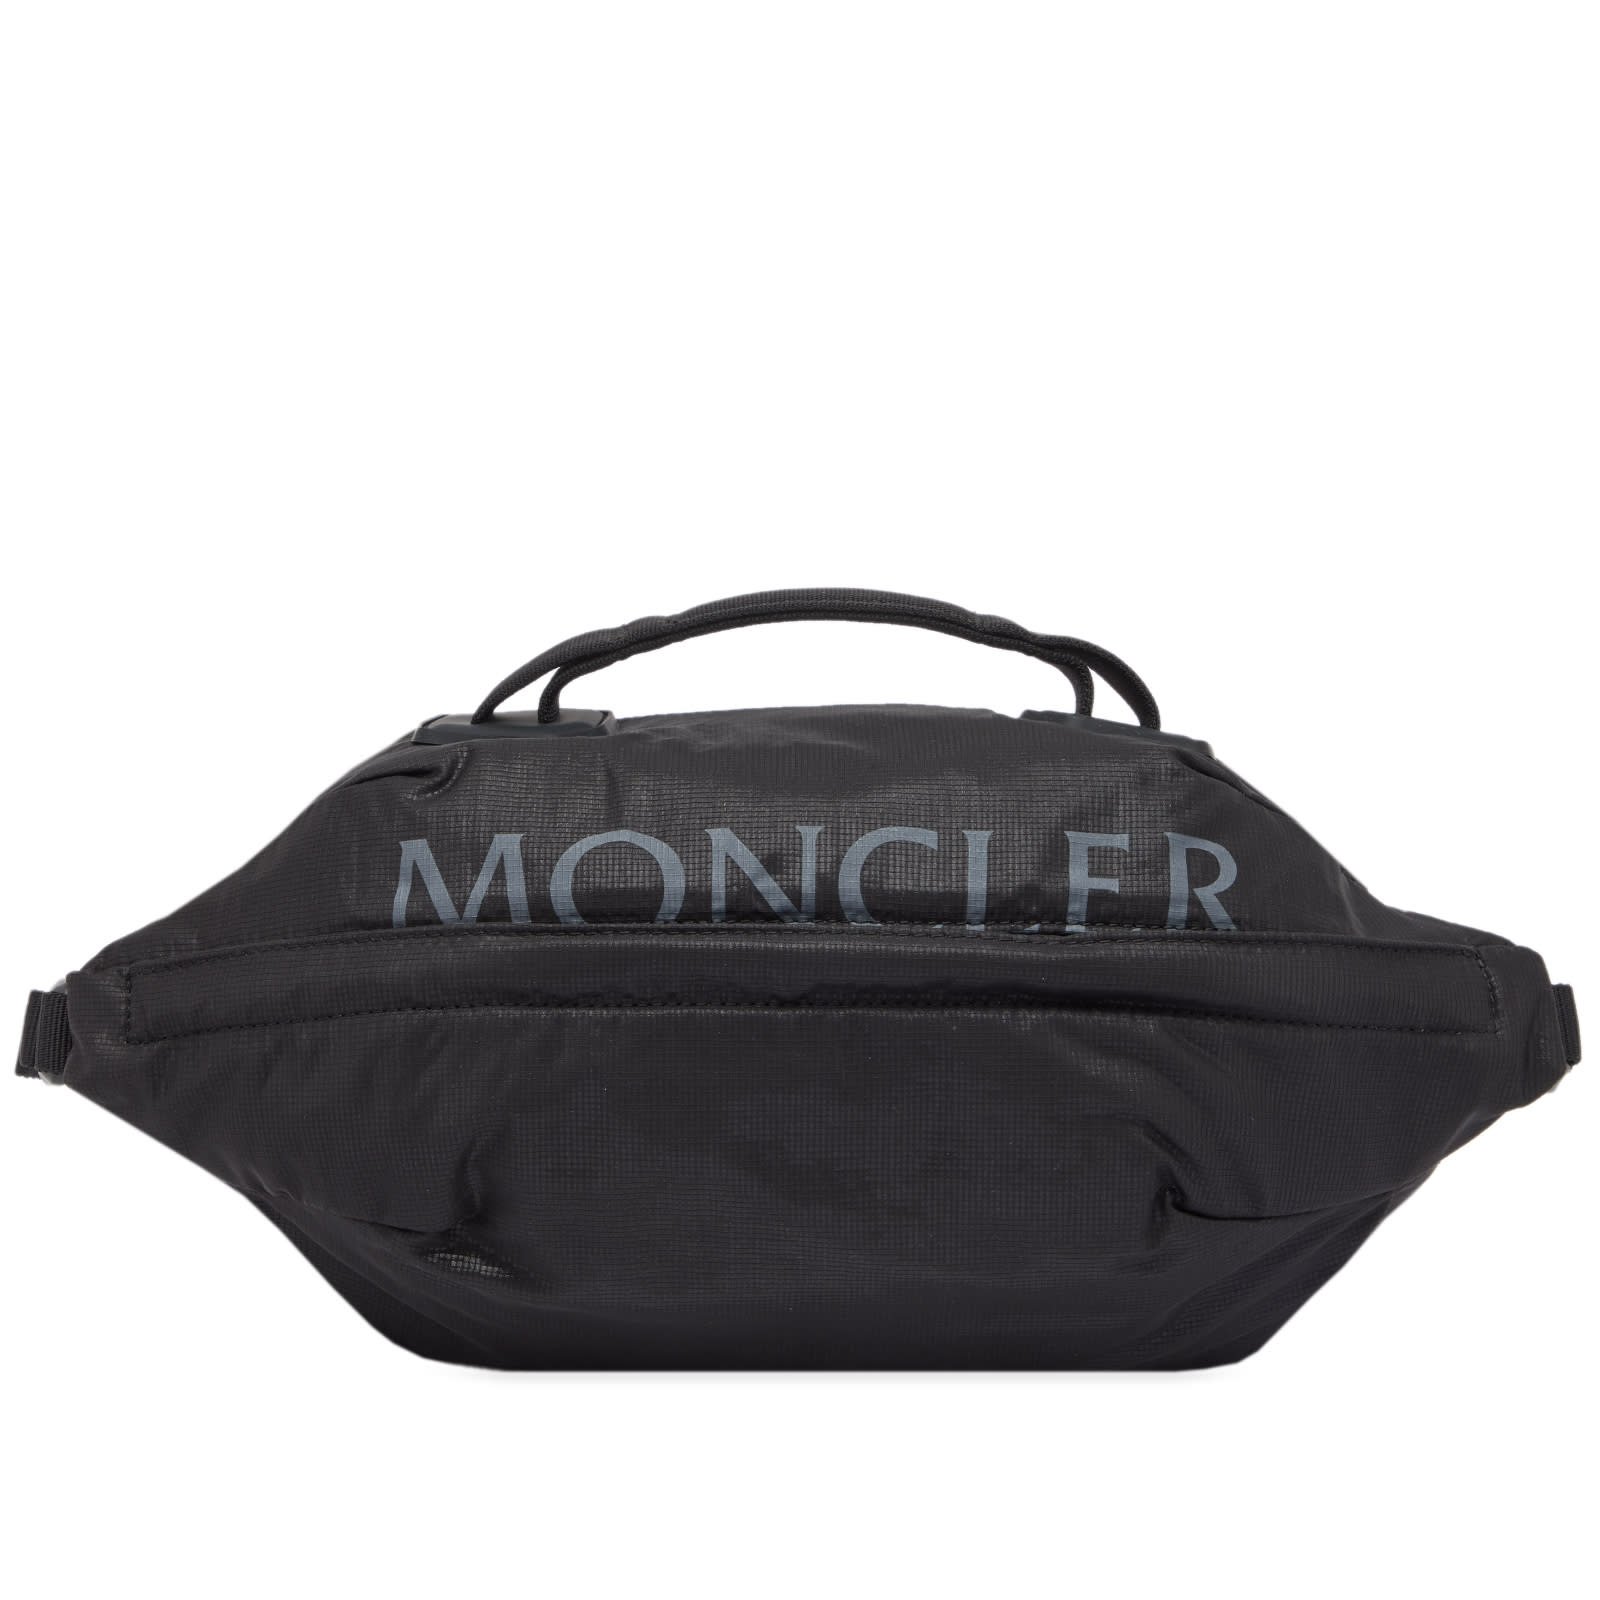 Bags & Small Accessories for Women - Accessories | Moncler IT